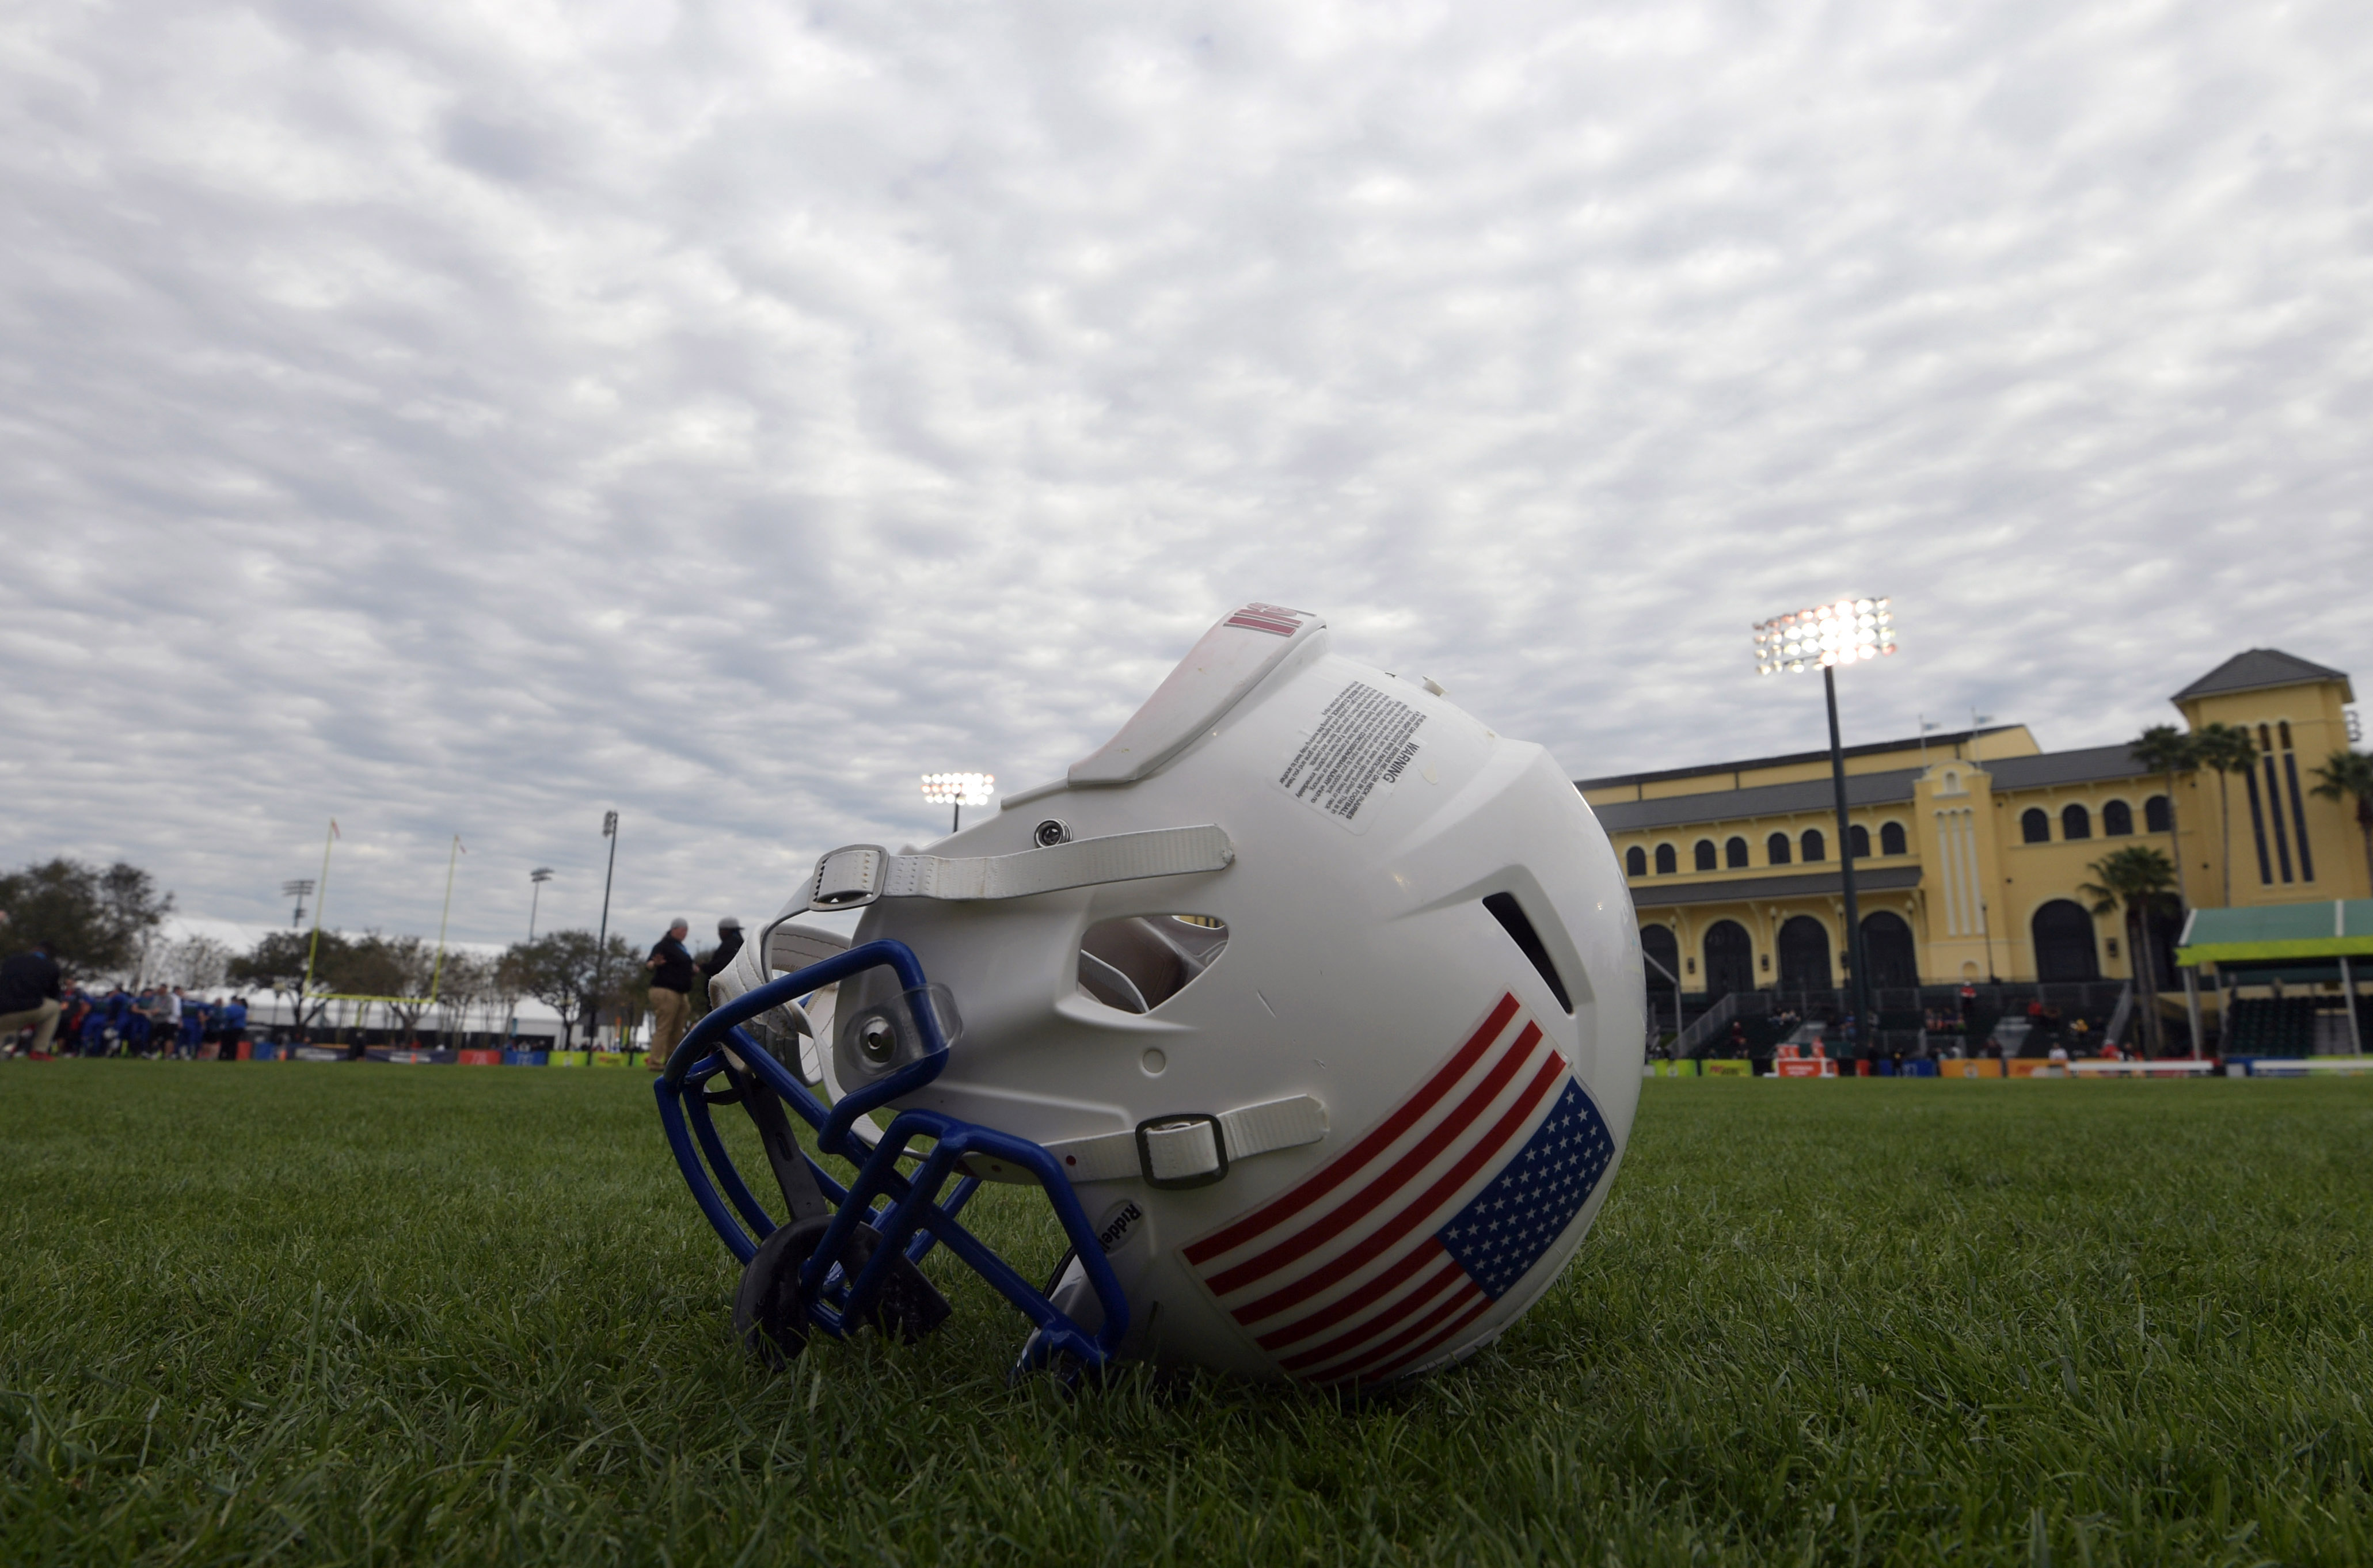 Girls' High School Football Title IX Suit Misses The Point